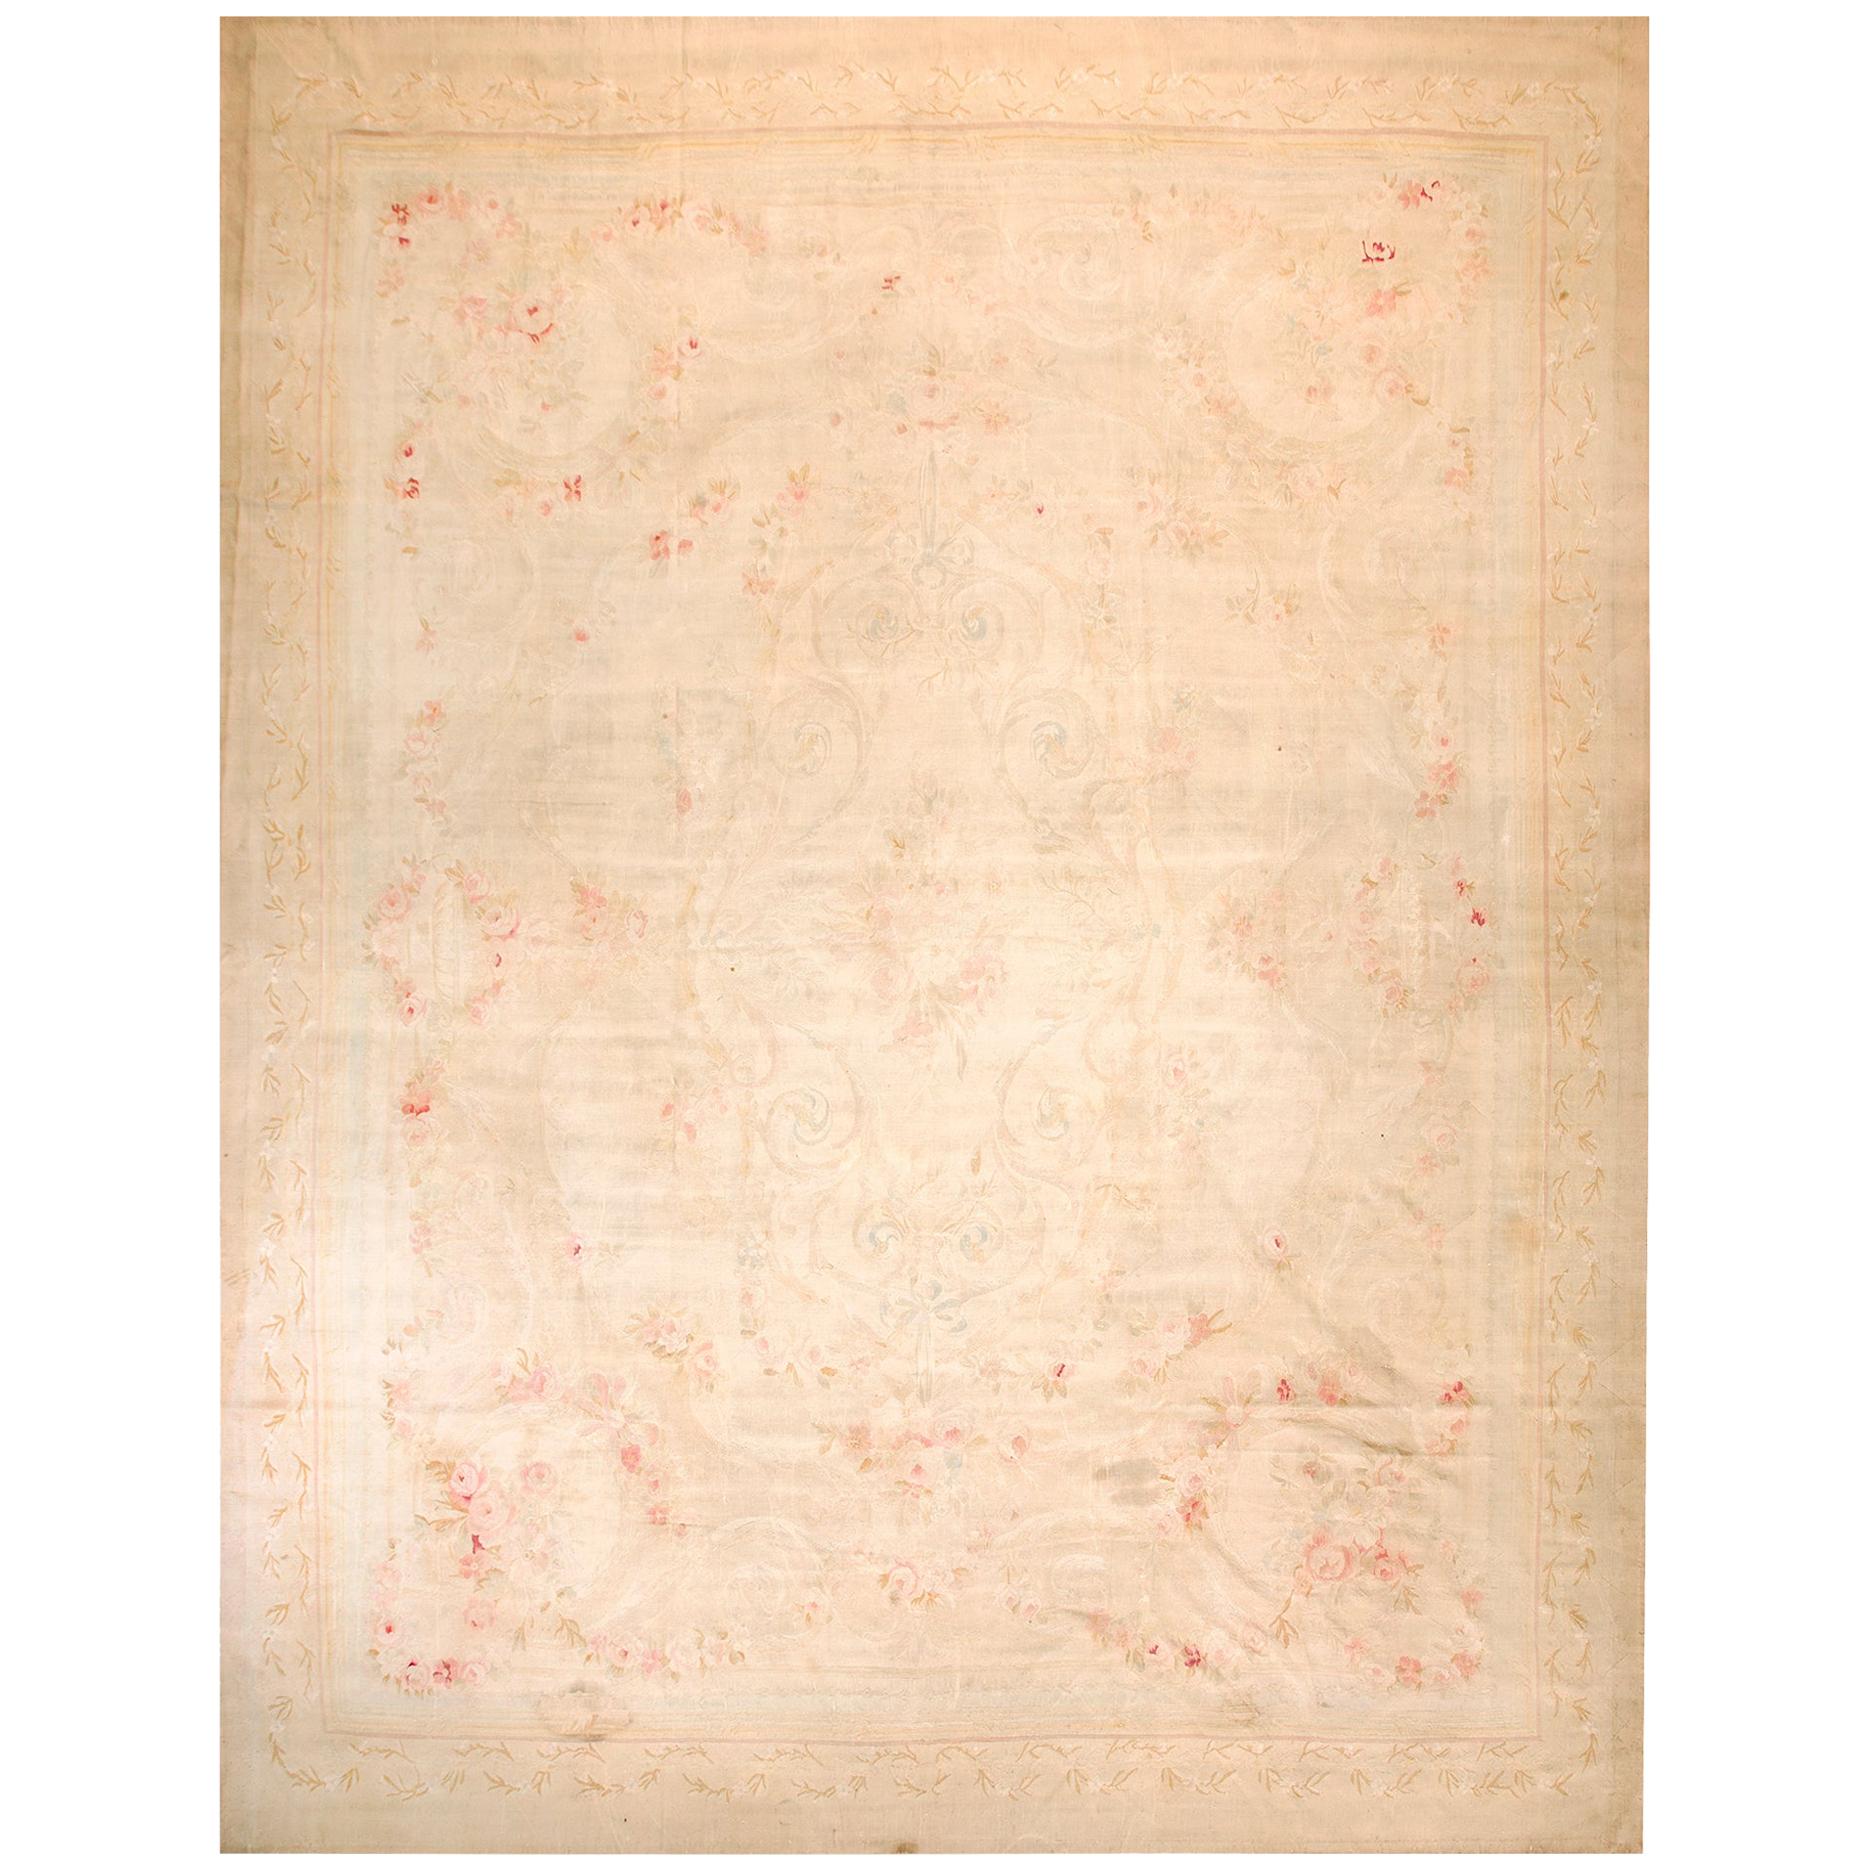 19th Century French Aubusson Carpet ( 12' x 15'6" - 365 x 472 ) For Sale